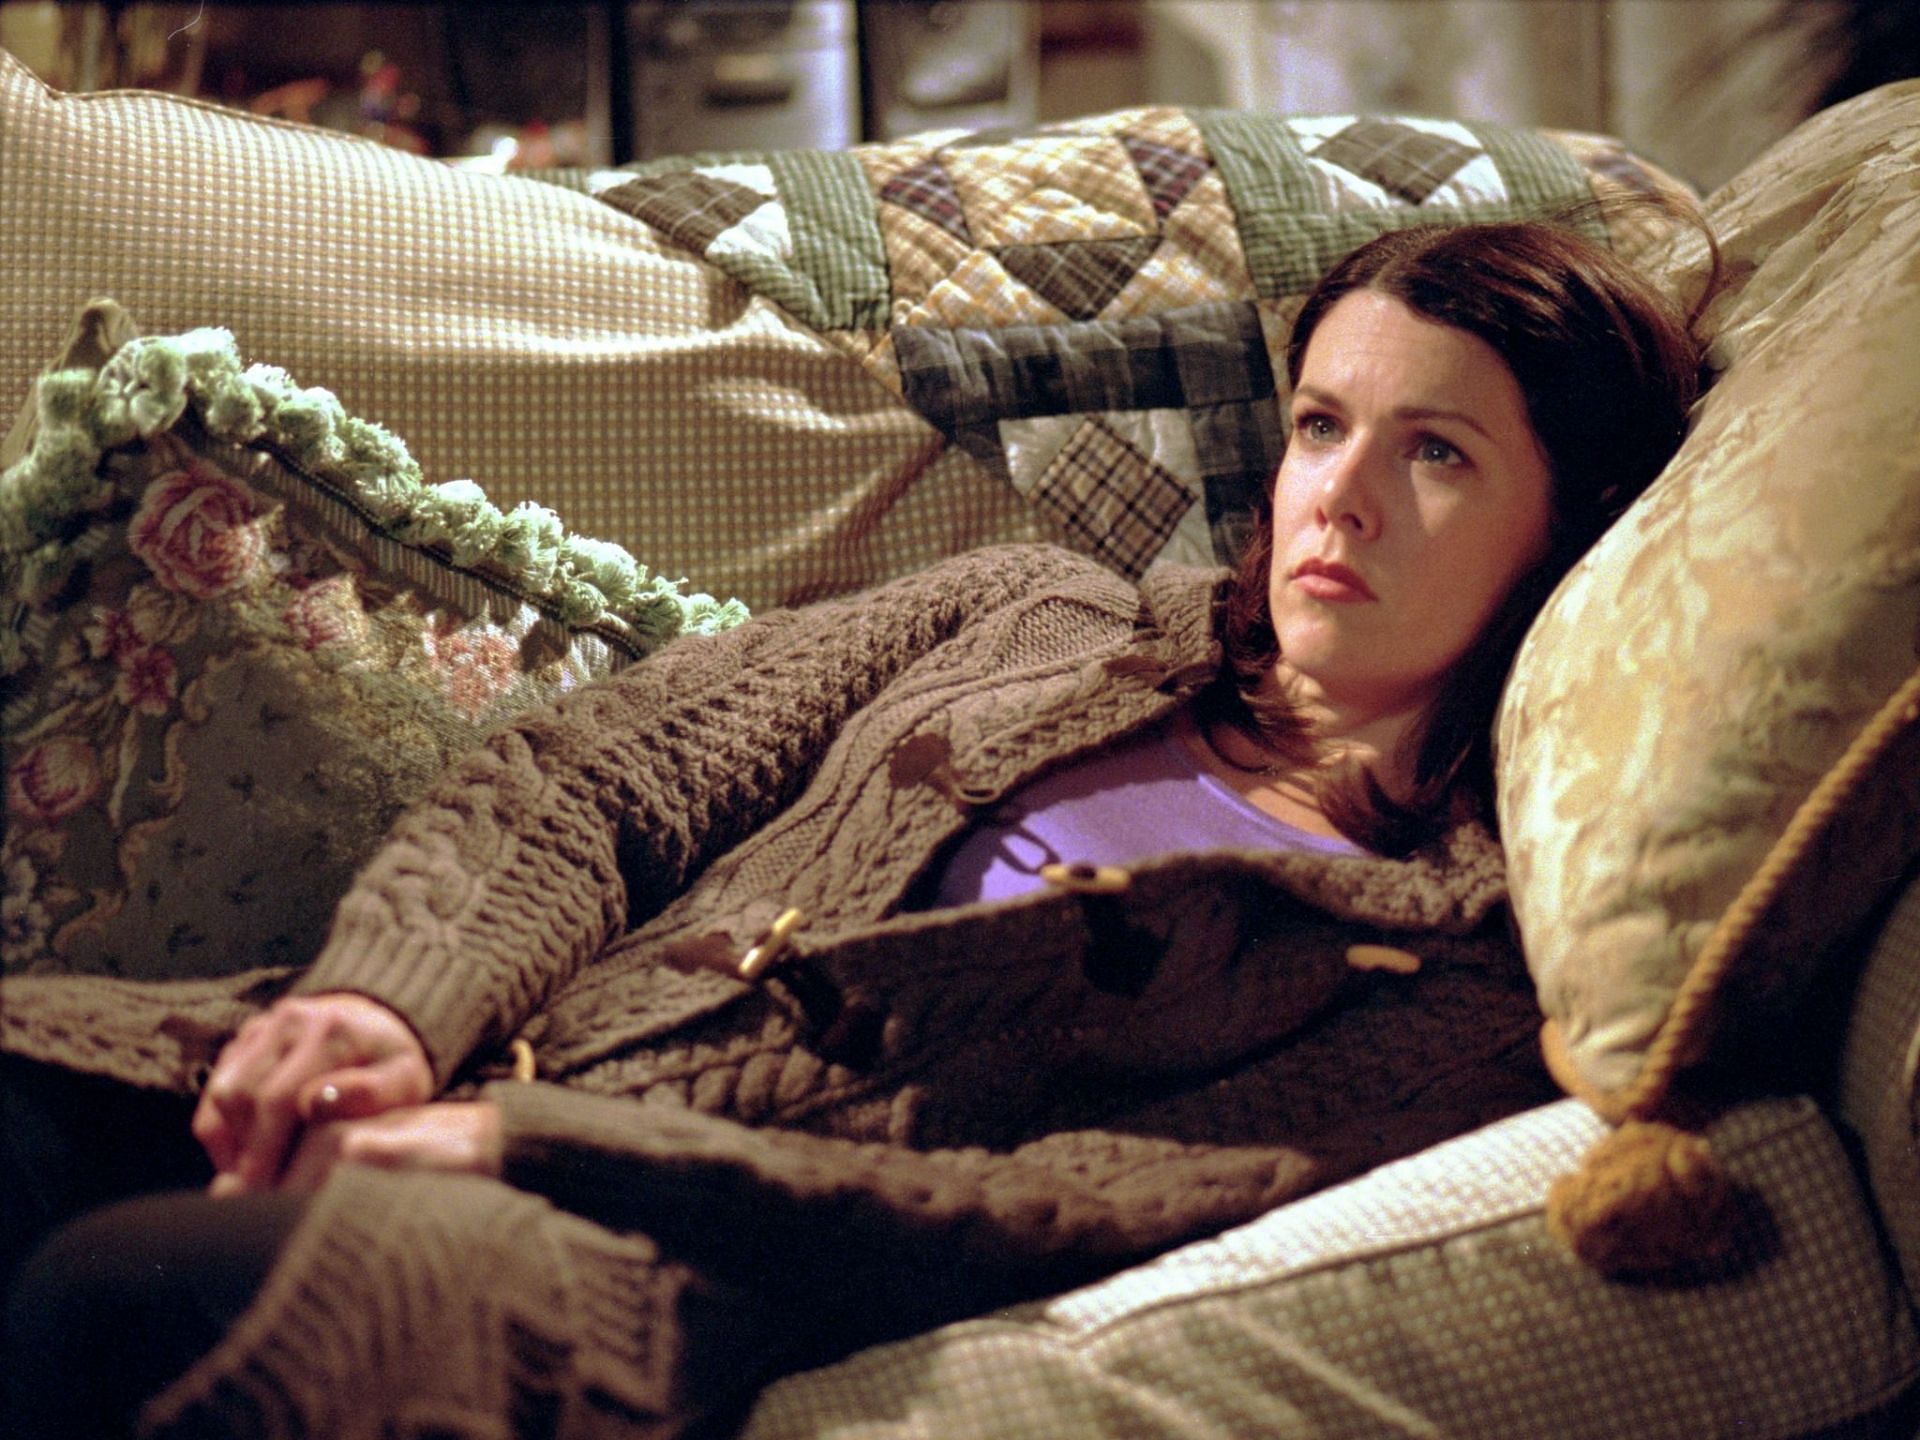 Still from the show (Image via Facebook/@Gilmore Girls)